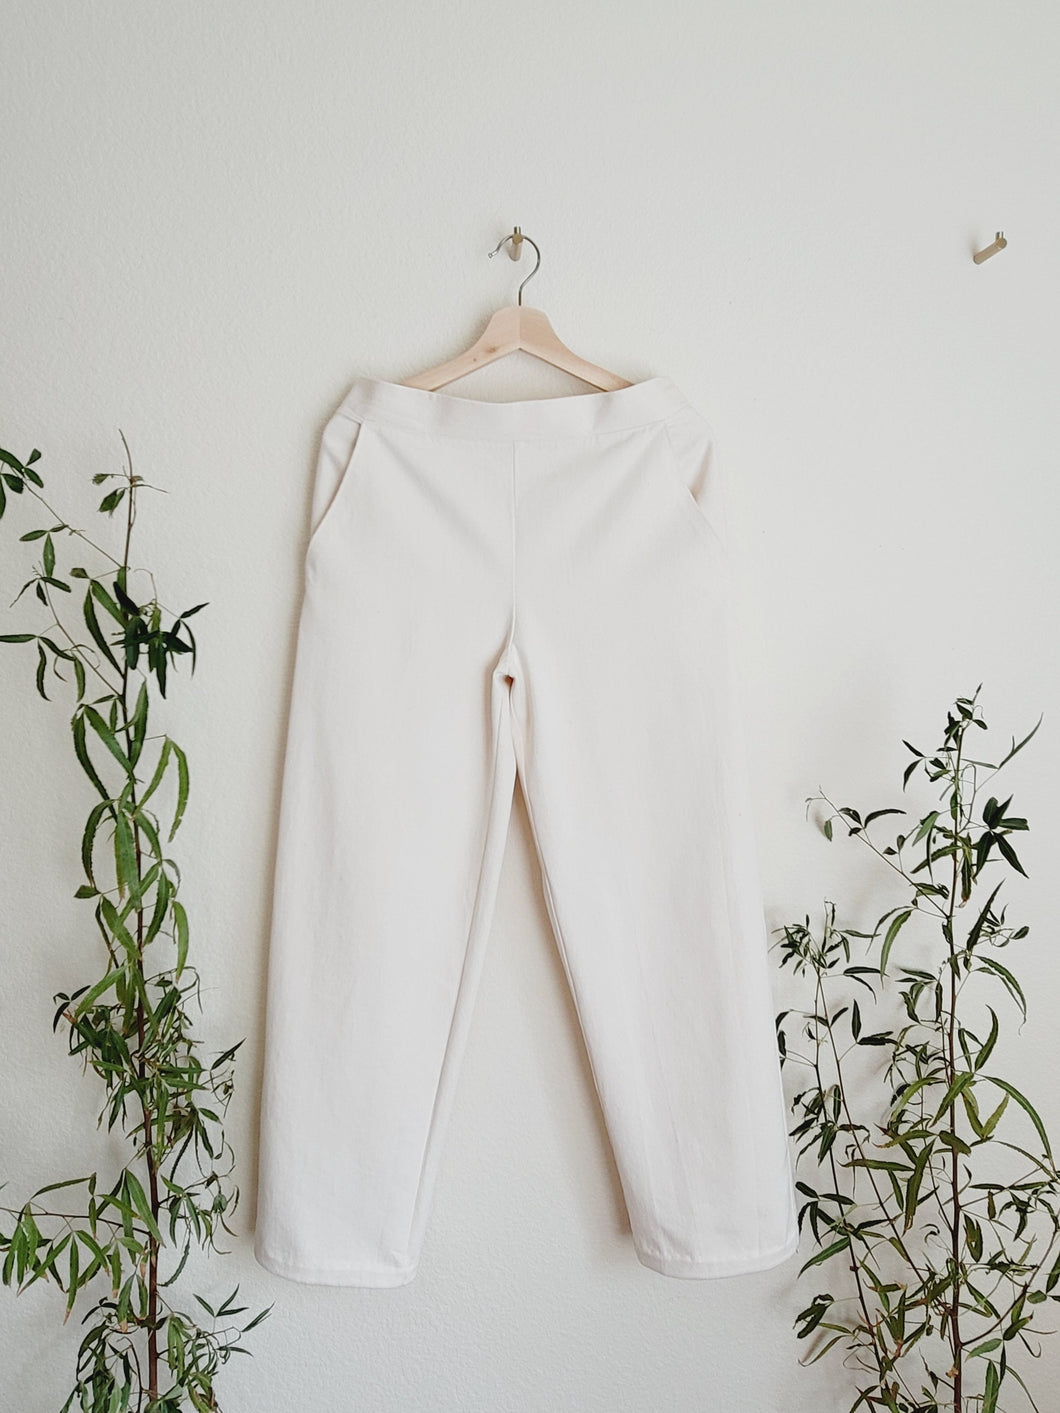 Off white cotton pants, ready to wear for brunch or site seeing.  They are hanging on a light natural wood hanger surrounded by greenery.